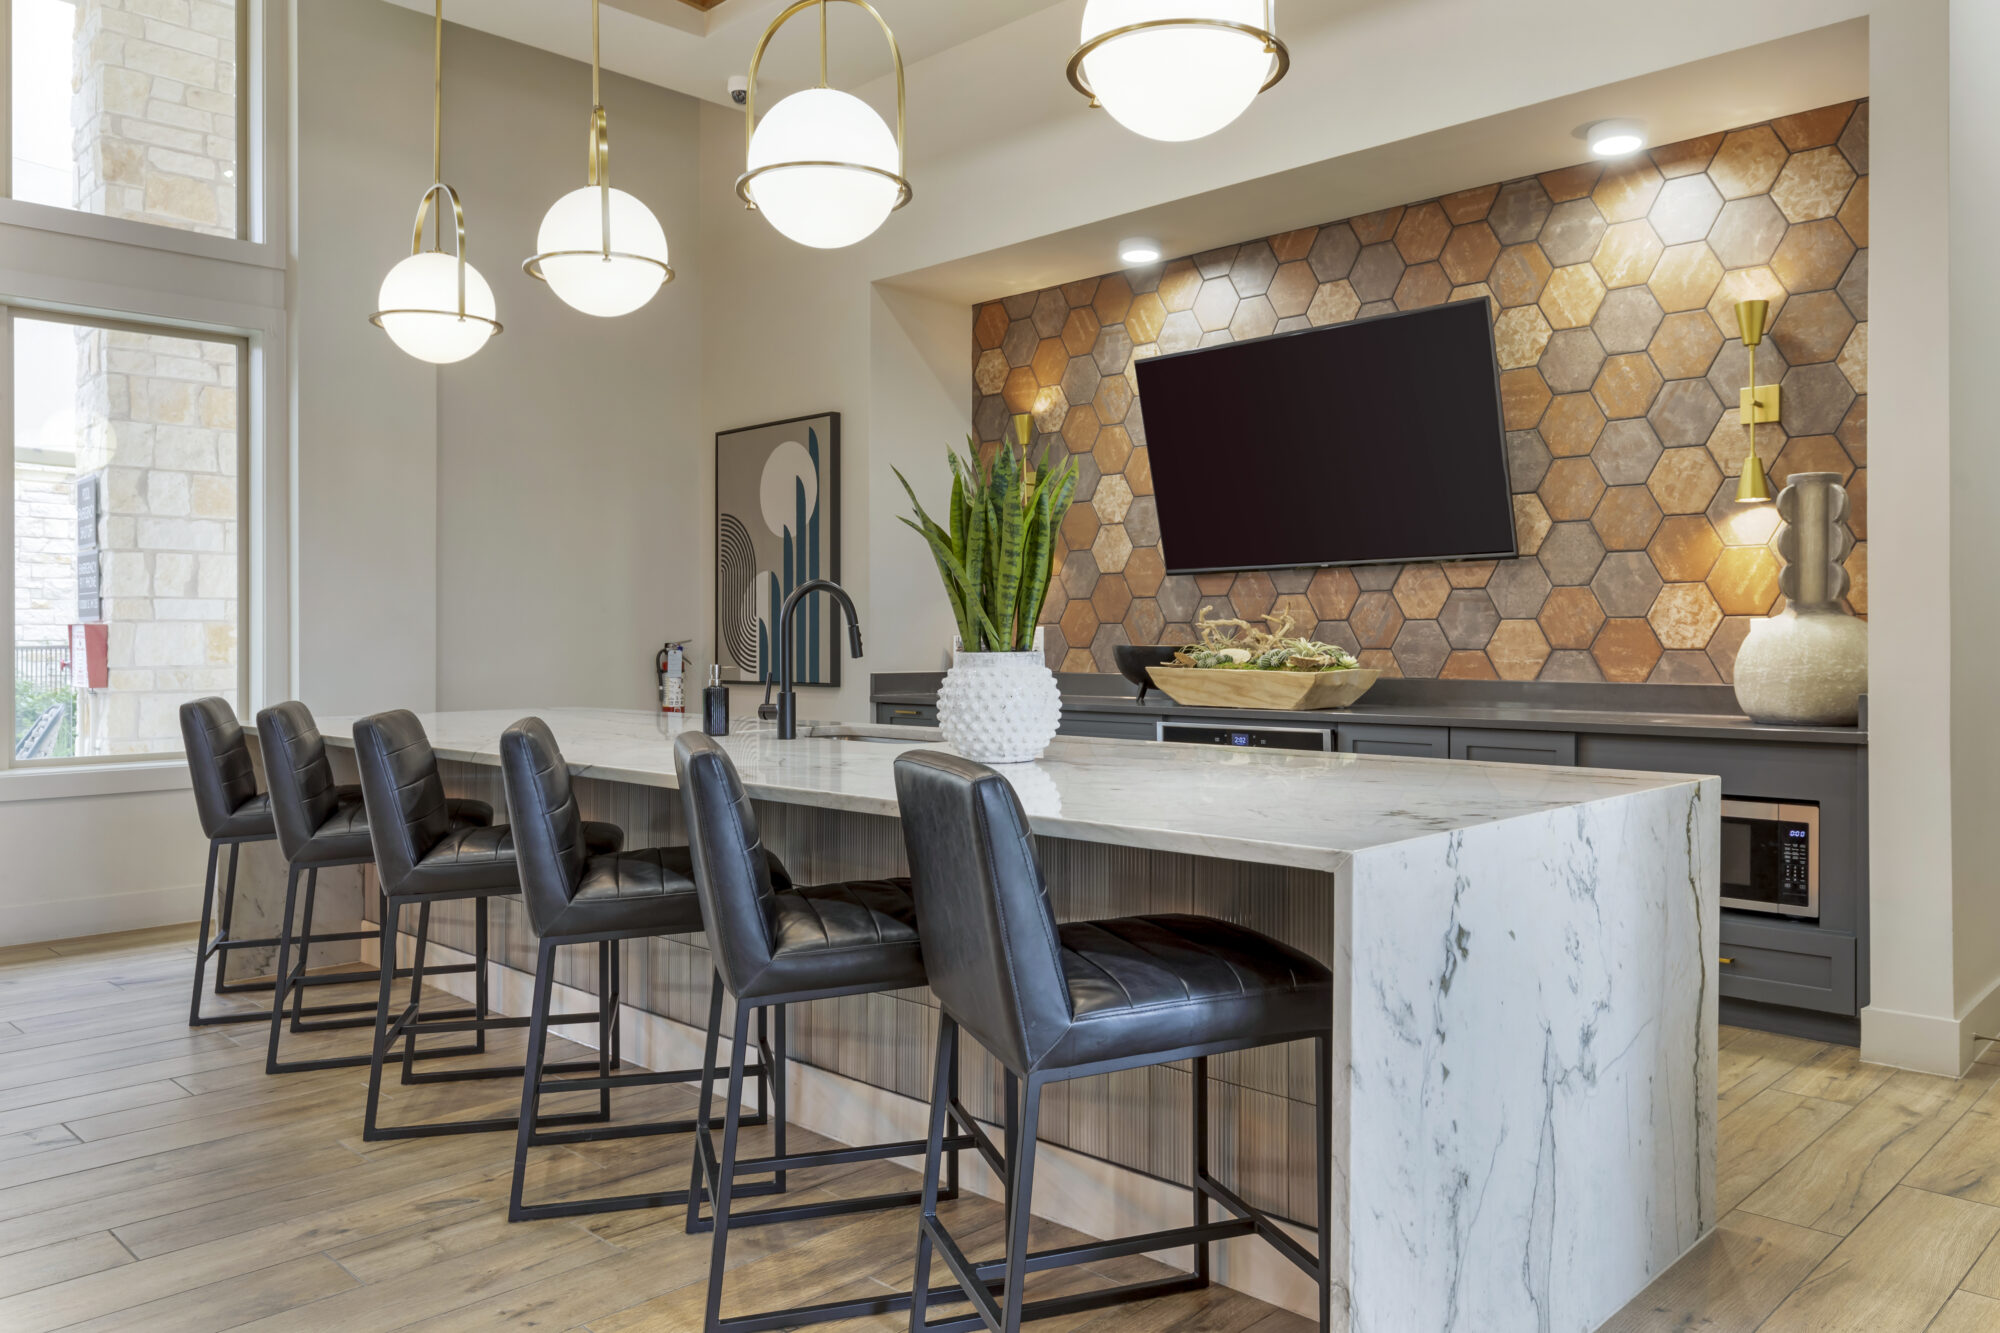 Demonstration kitchen in clubhouse with pendant lighting, barstool seating, and wall-mounted TV